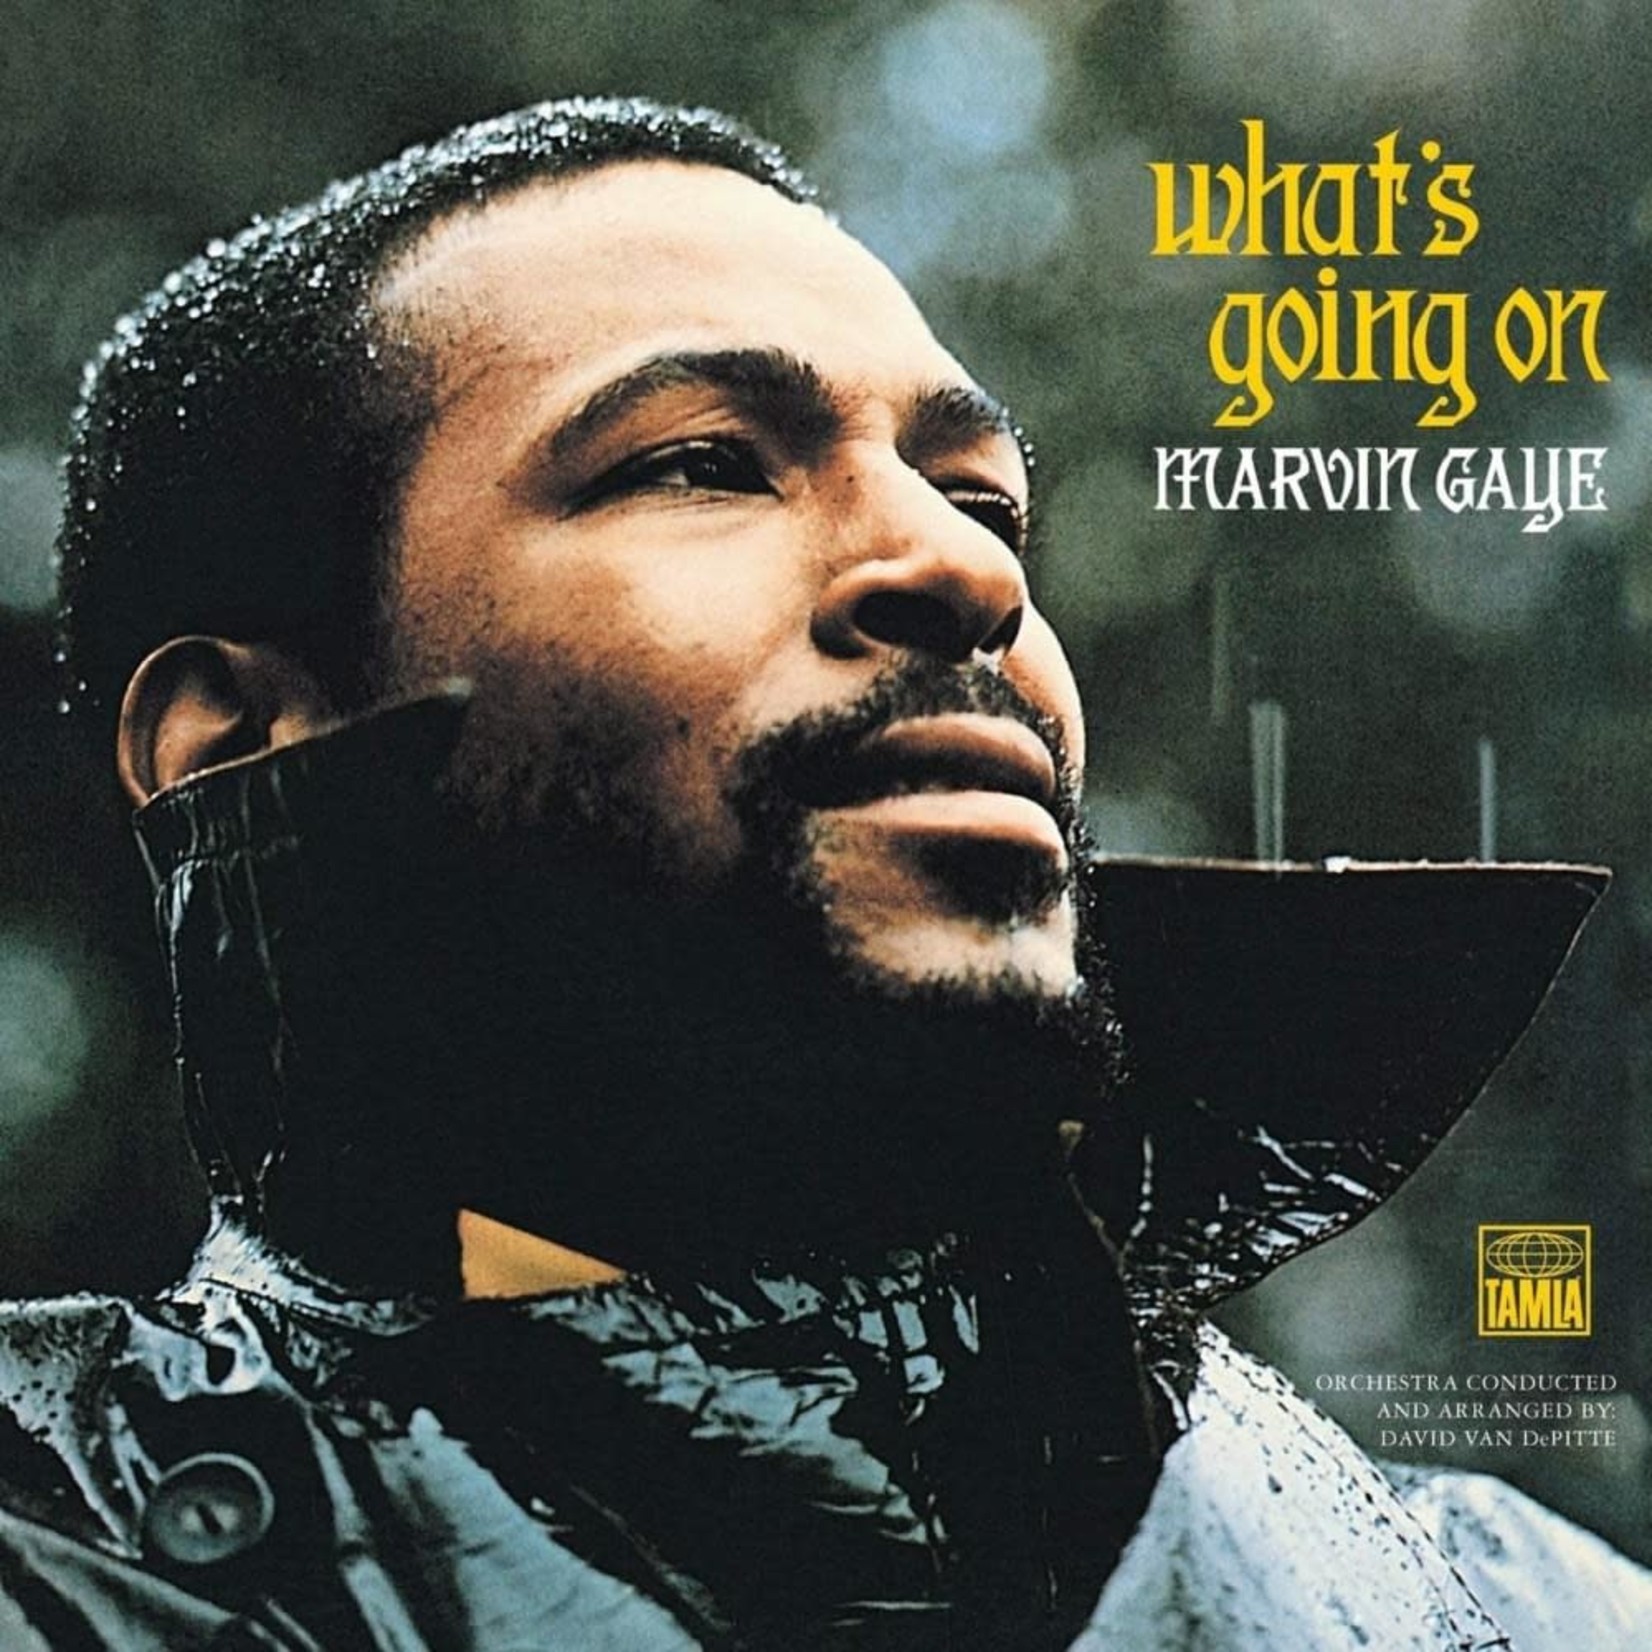 [New] Marvin Gaye - What's Going On - 50th Anniversary Edition (2LP)